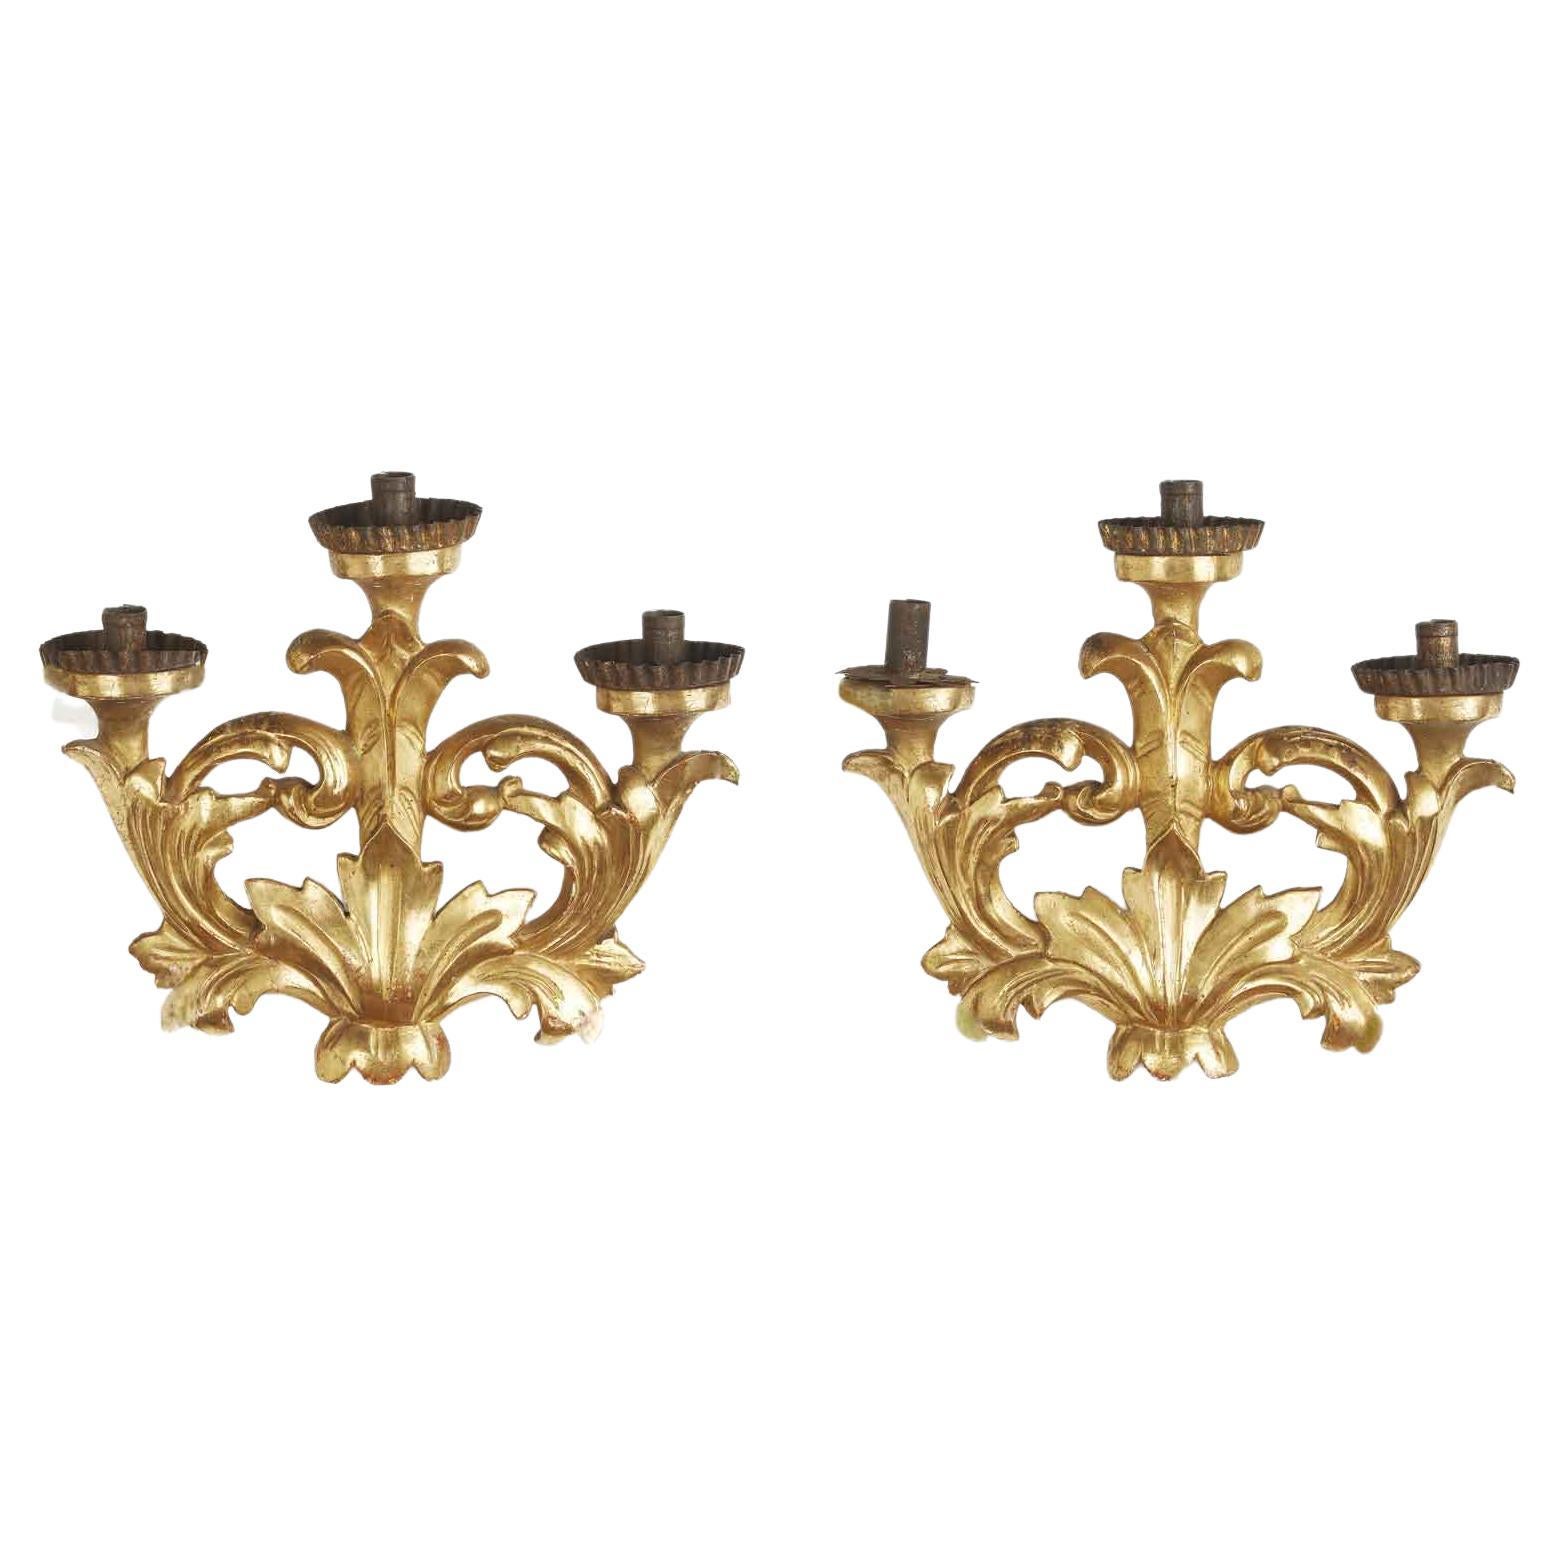 Pair of Italian Baroque Giltwood Wall Candelabra 19th Century Carved Sconces For Sale